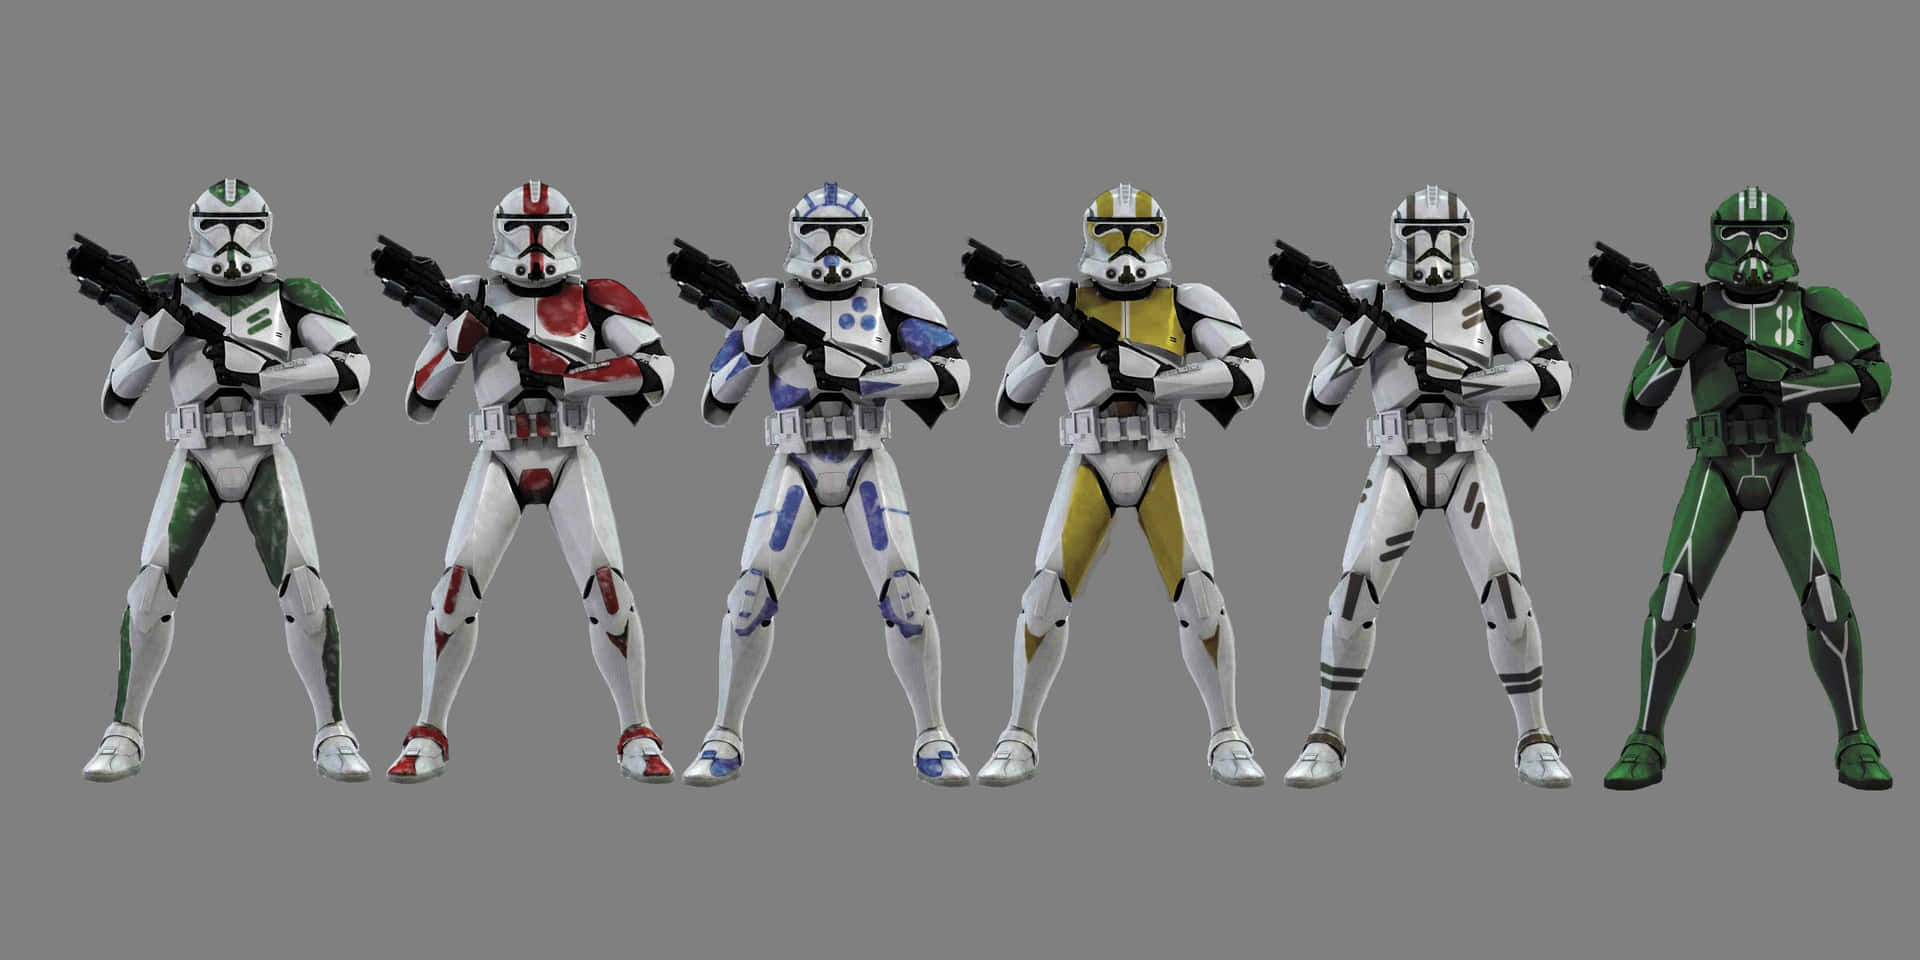 Get Ready For Battle With These Clone Troopers From The Star Wars Universe! Background